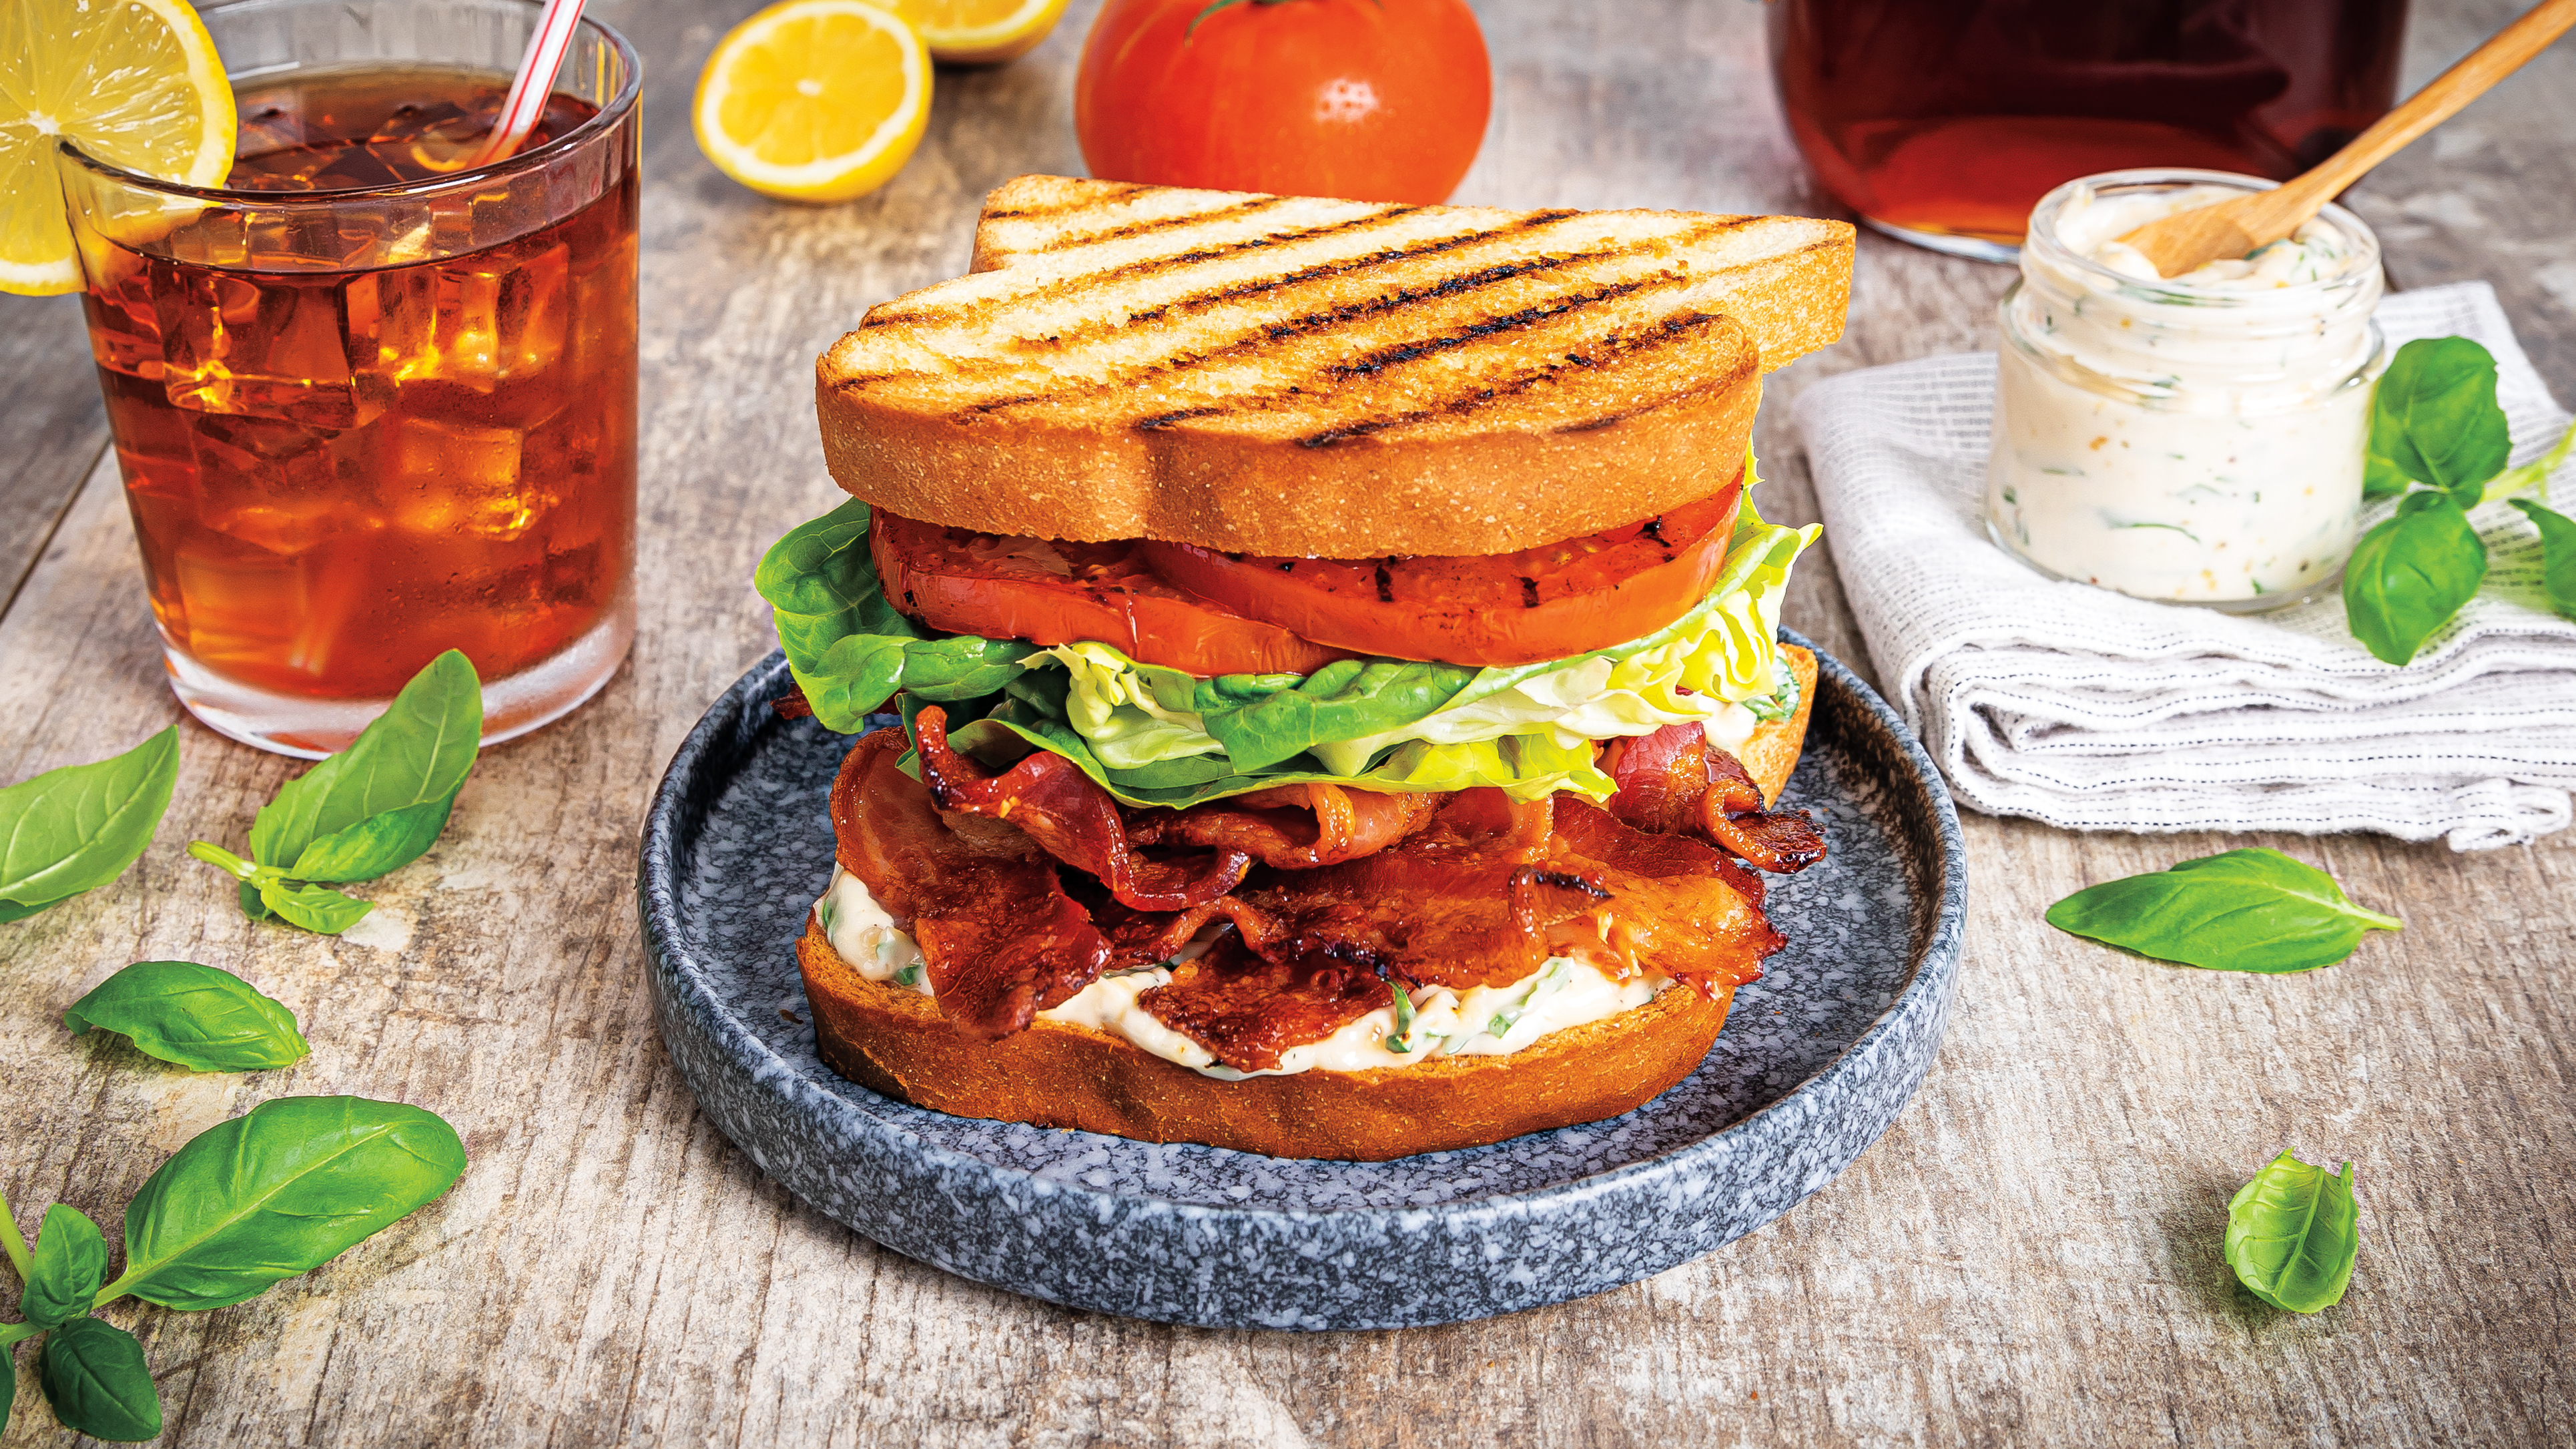 Grilled BLT Sandwiches with Basil Mayo